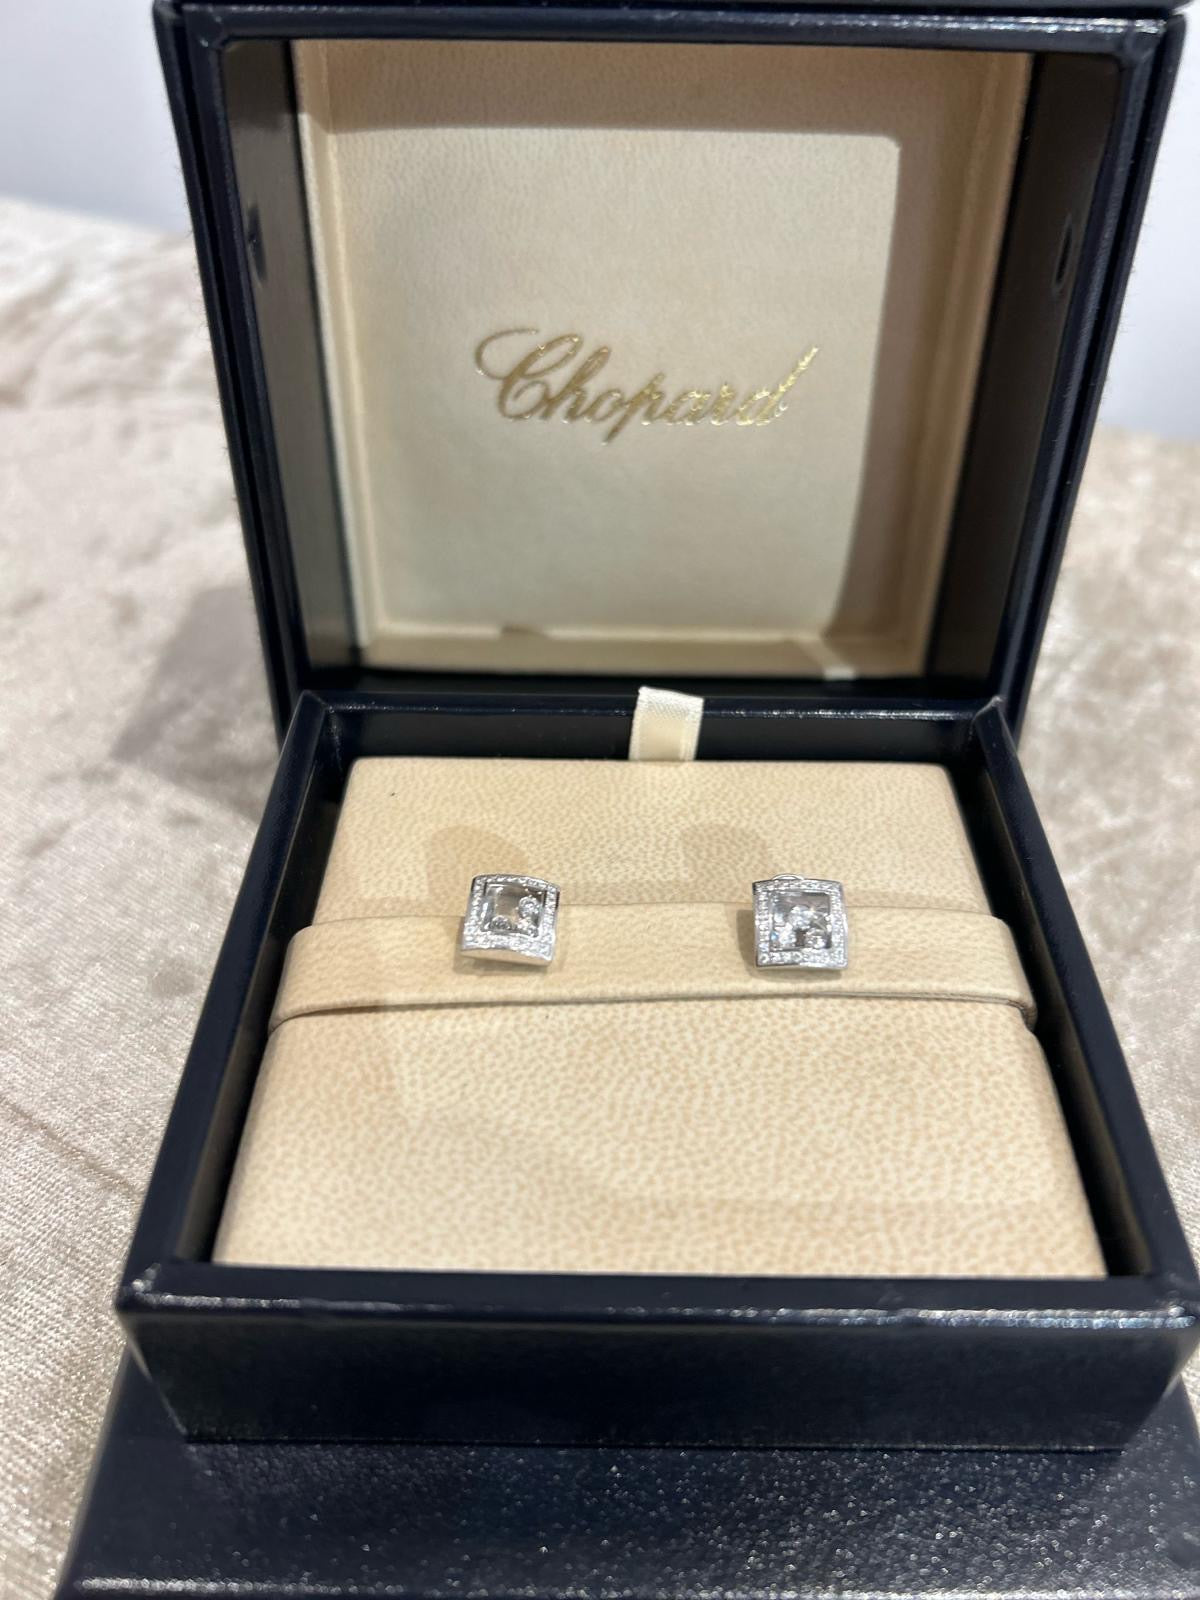 Chopard Happy 16ct White Gold Square Diamond Earrings With 3 Floating Diamonds